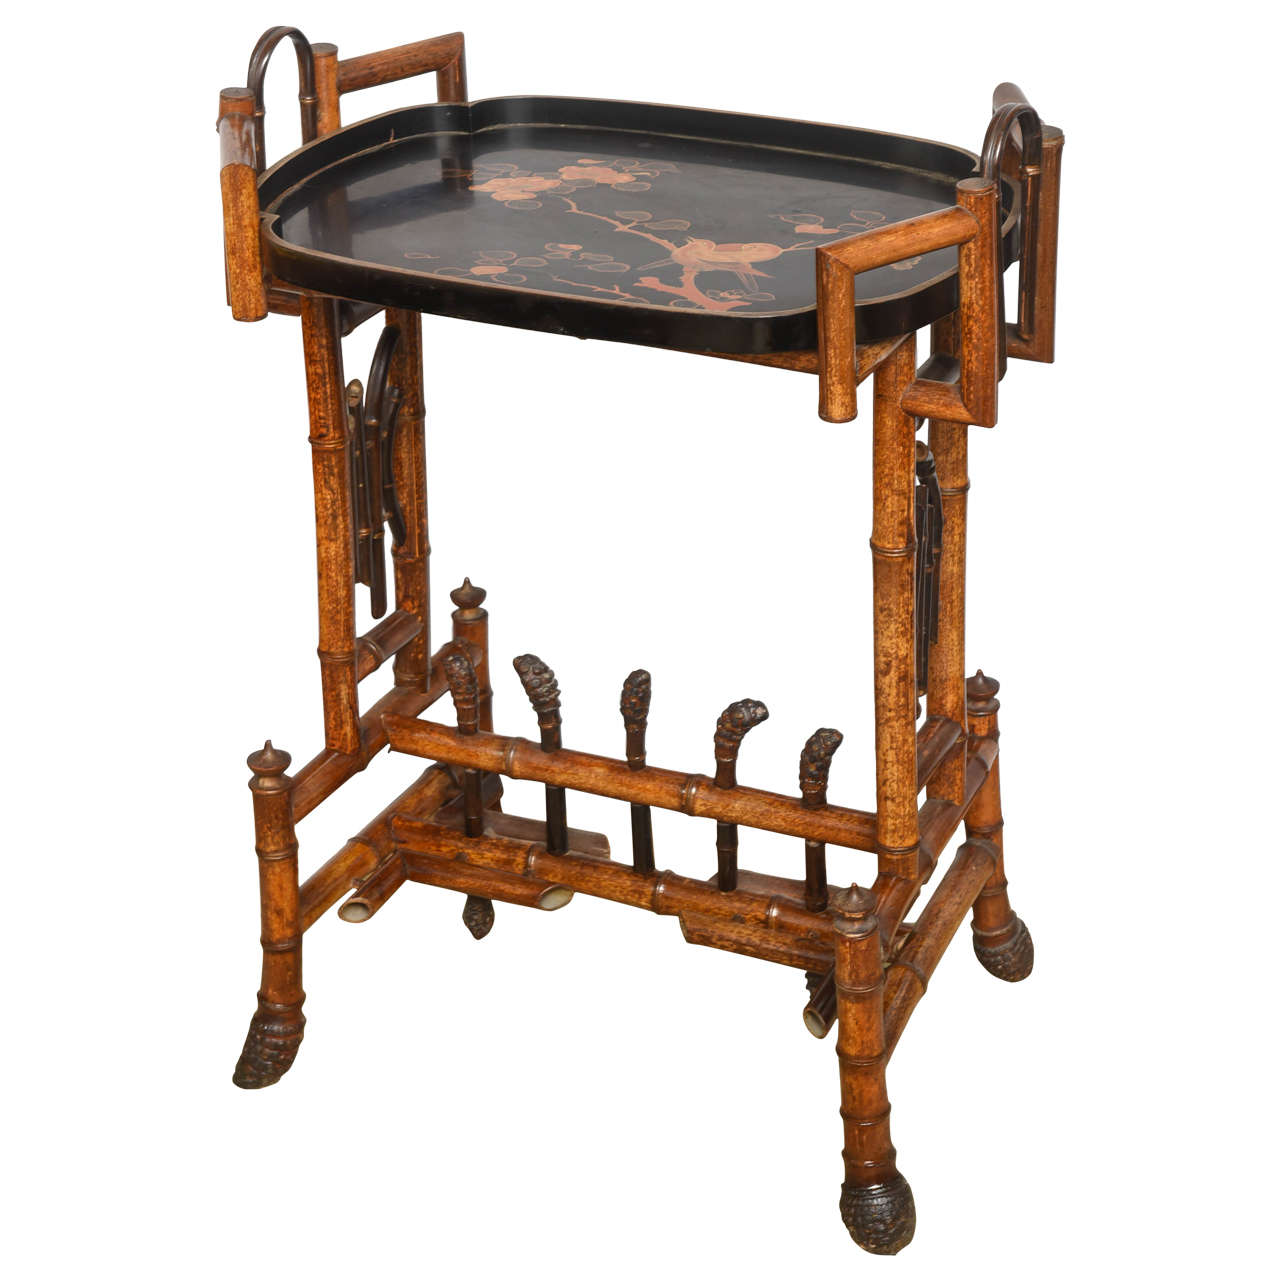 19th Century English Bamboo Table with Decorated Lacquer Tray